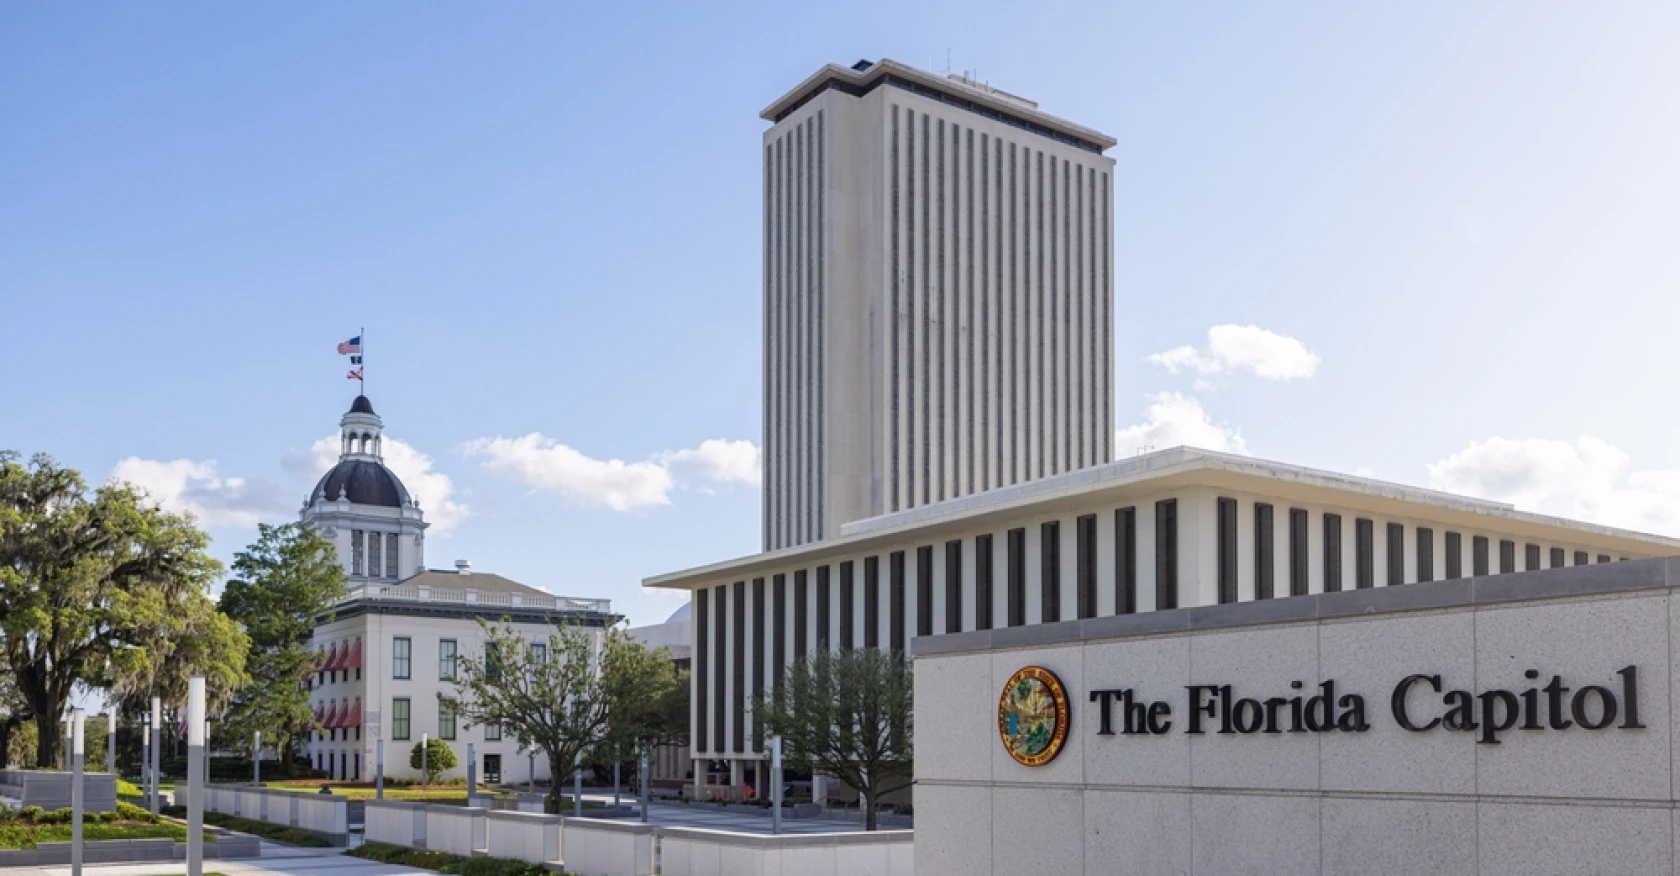 Photograph of the State Capitol building in Tallahassee, Florida.